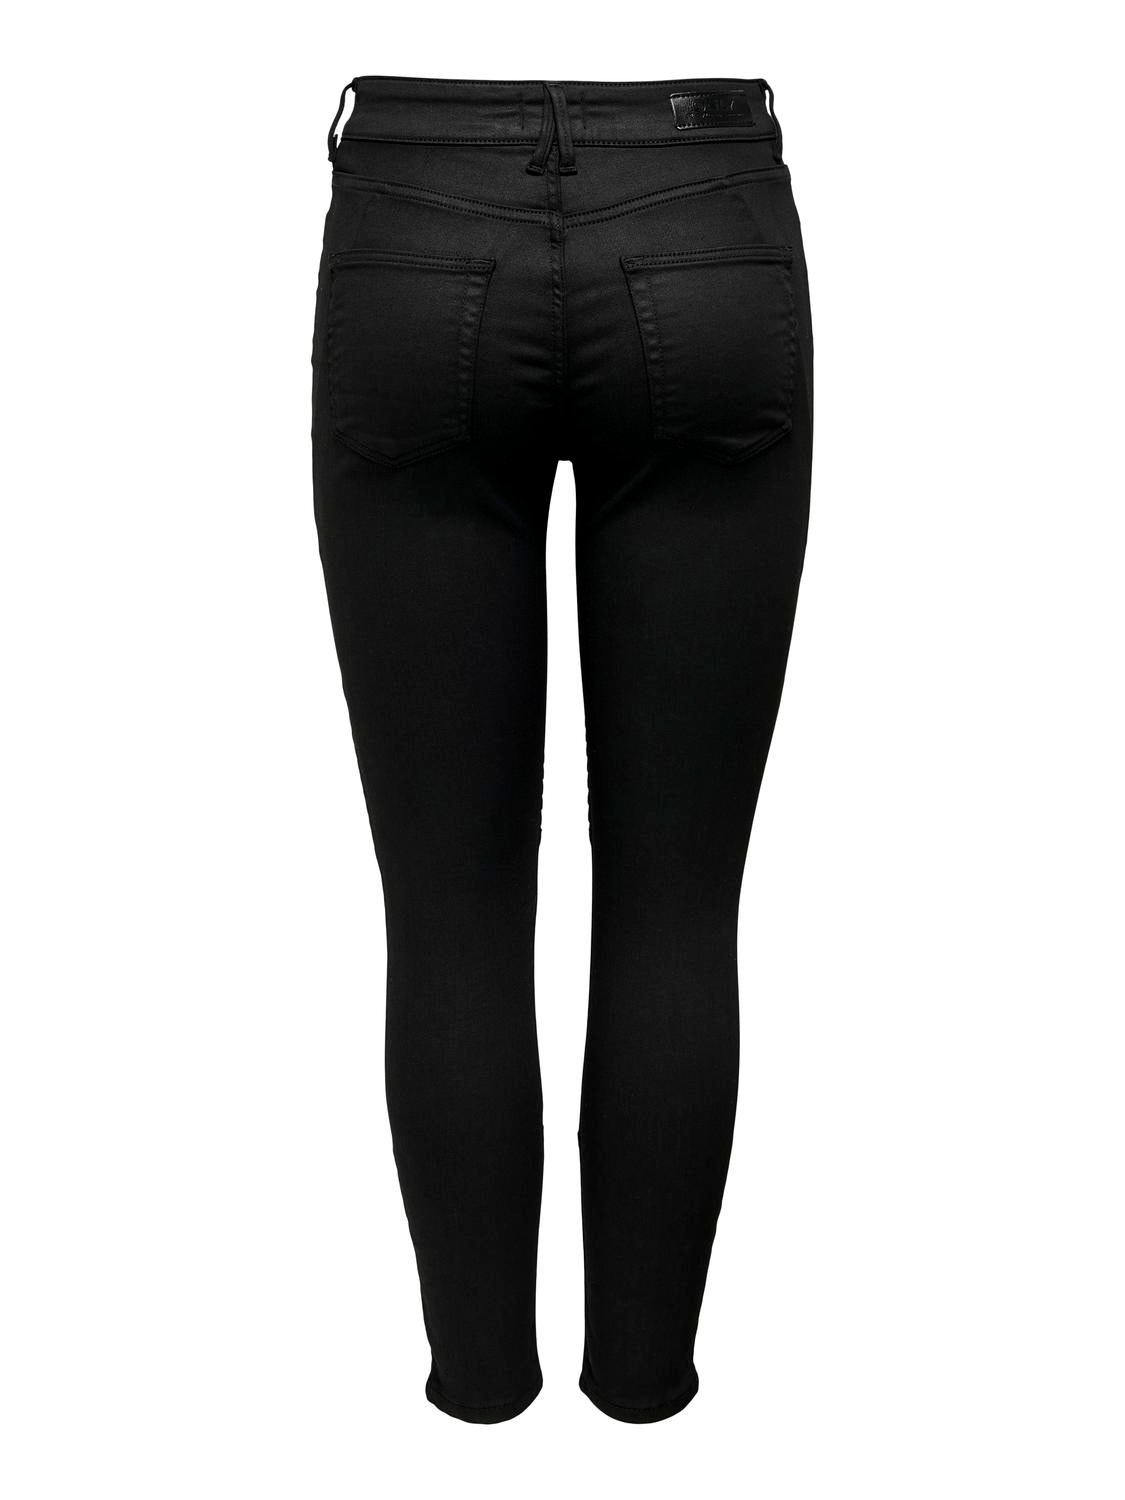 ONLY Jeans Skinny Fit Taille moyenne -Black - 15281319